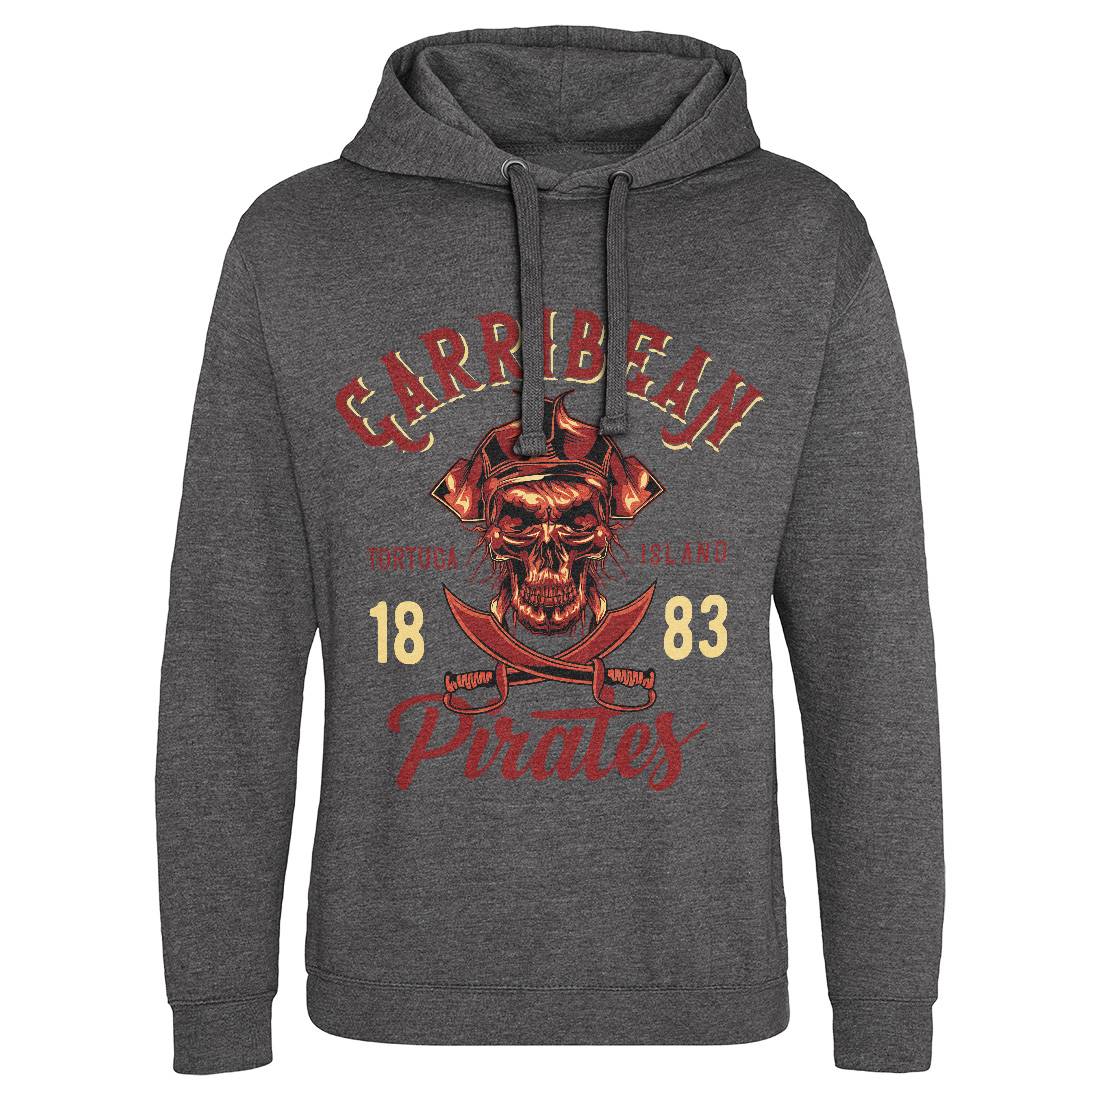 Pirate Mens Hoodie Without Pocket Navy B160